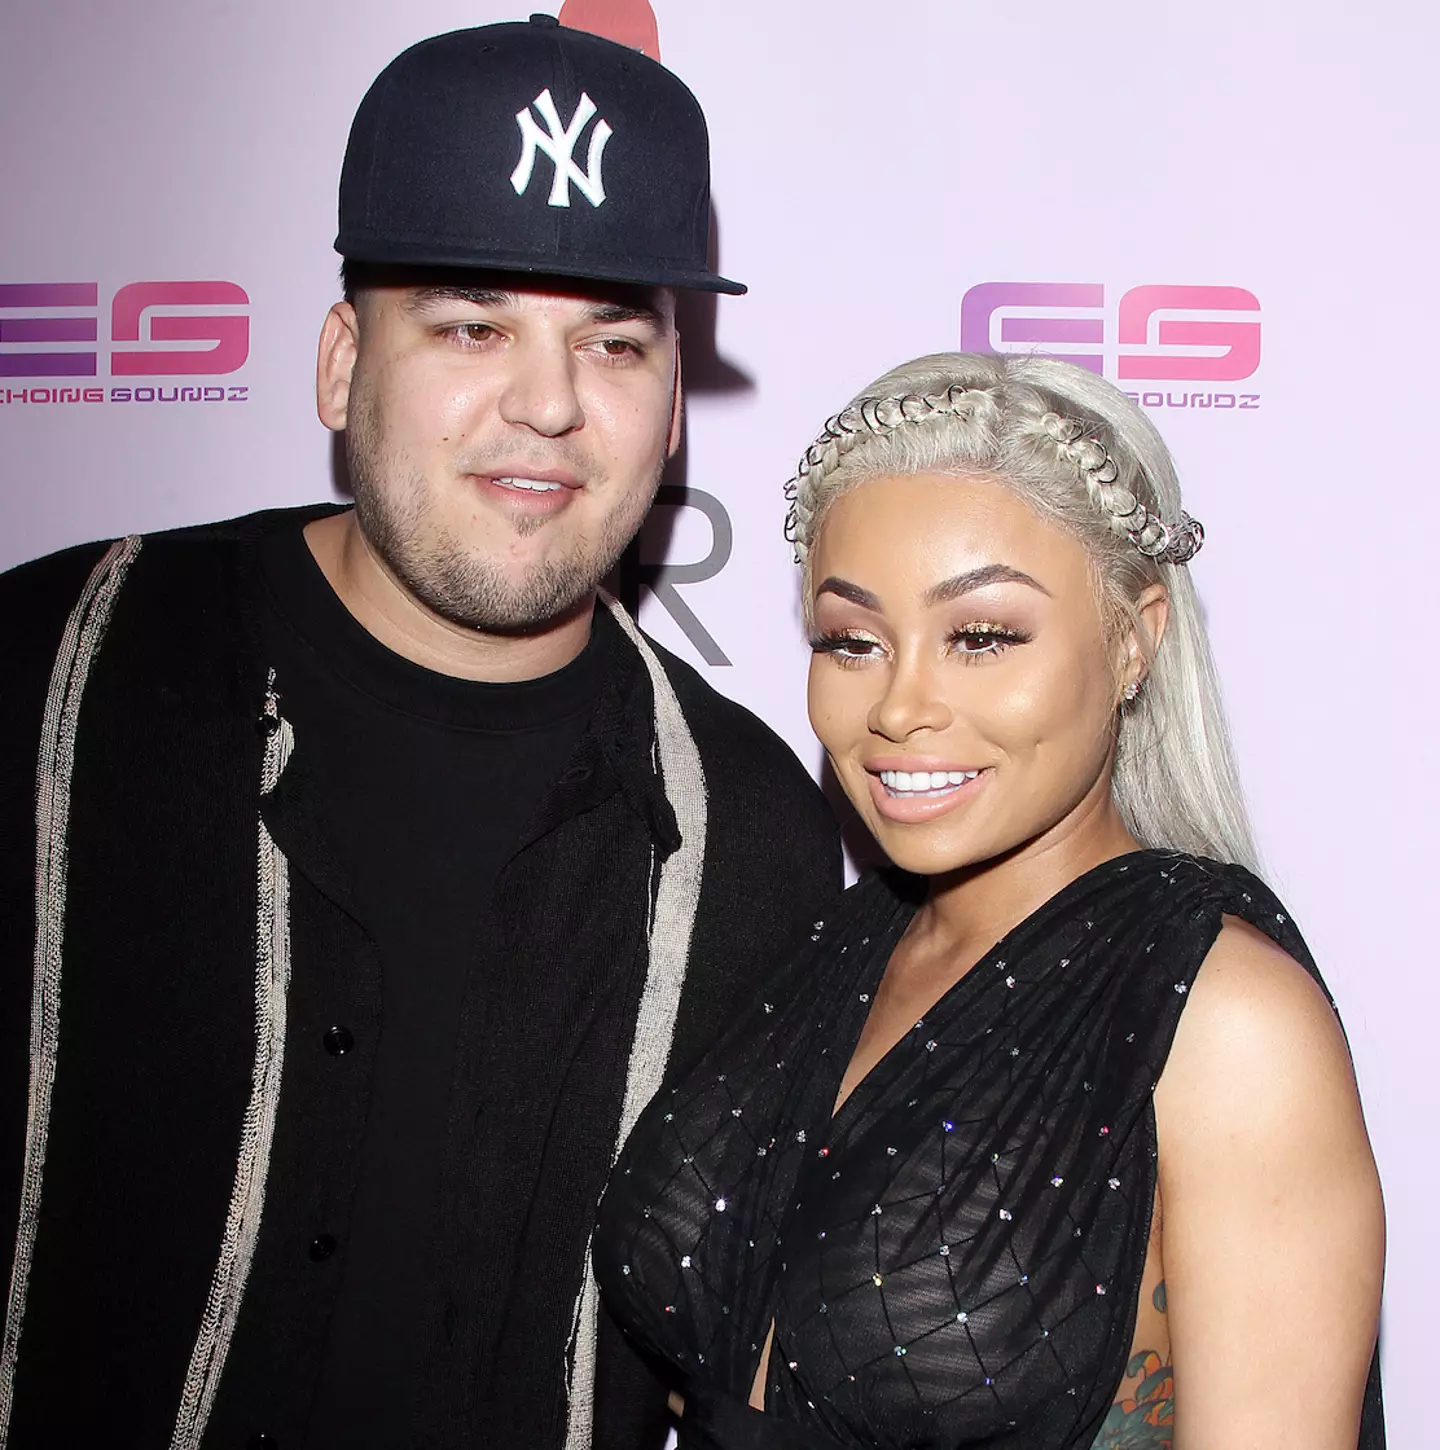 Rob & Chyna aired in 2016 and was cancelled after one season. (